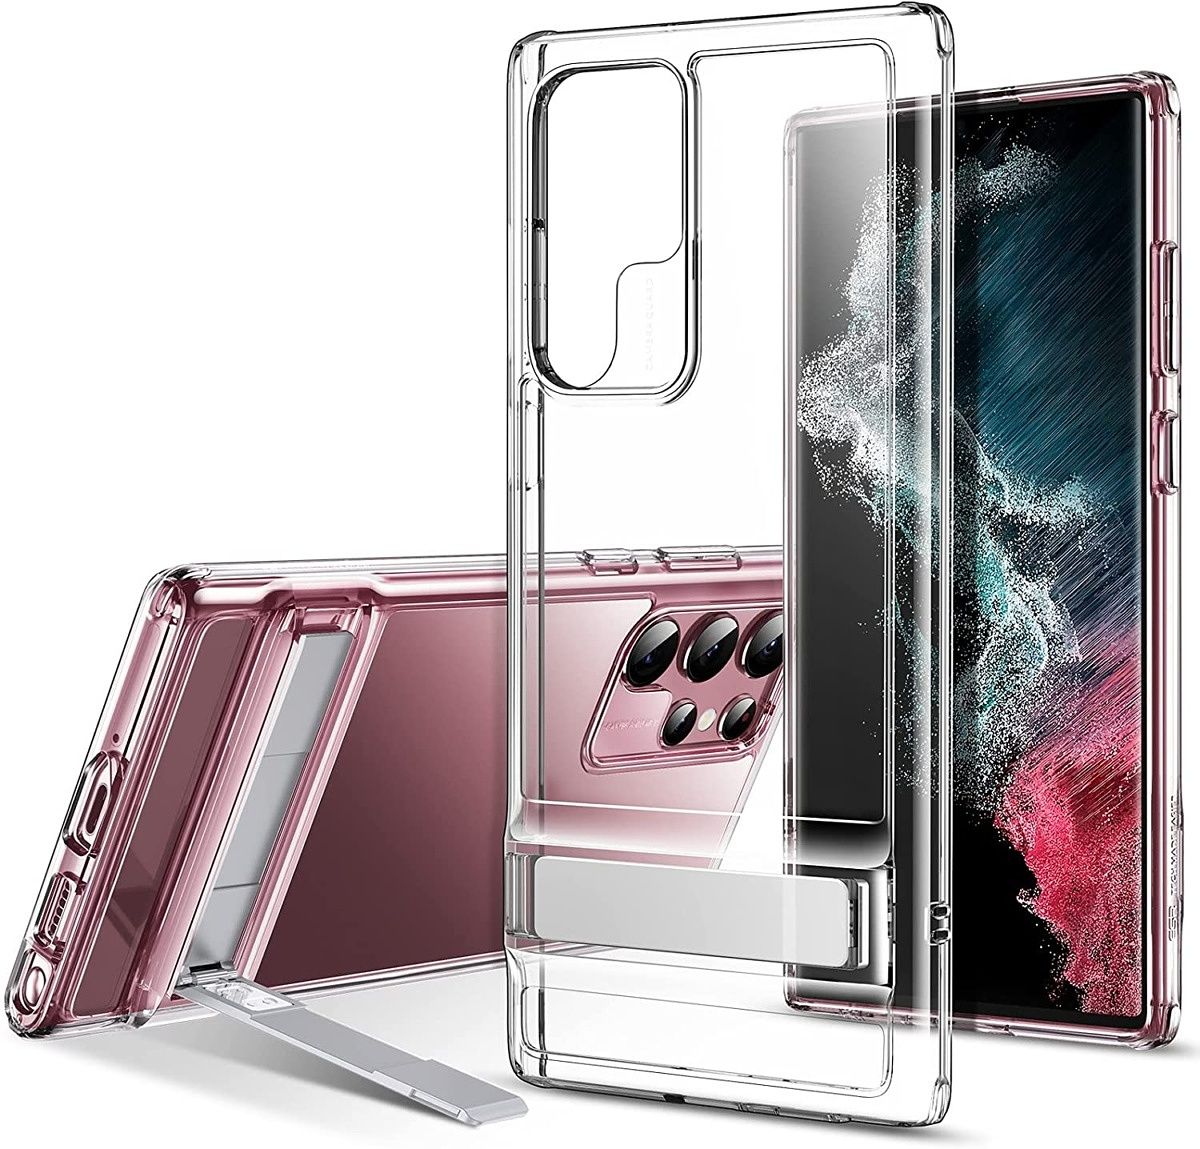 Here's a clear case if you want to show off the back of your phone but also want to add a utility in the form of a kickstand.  Very very cheap.